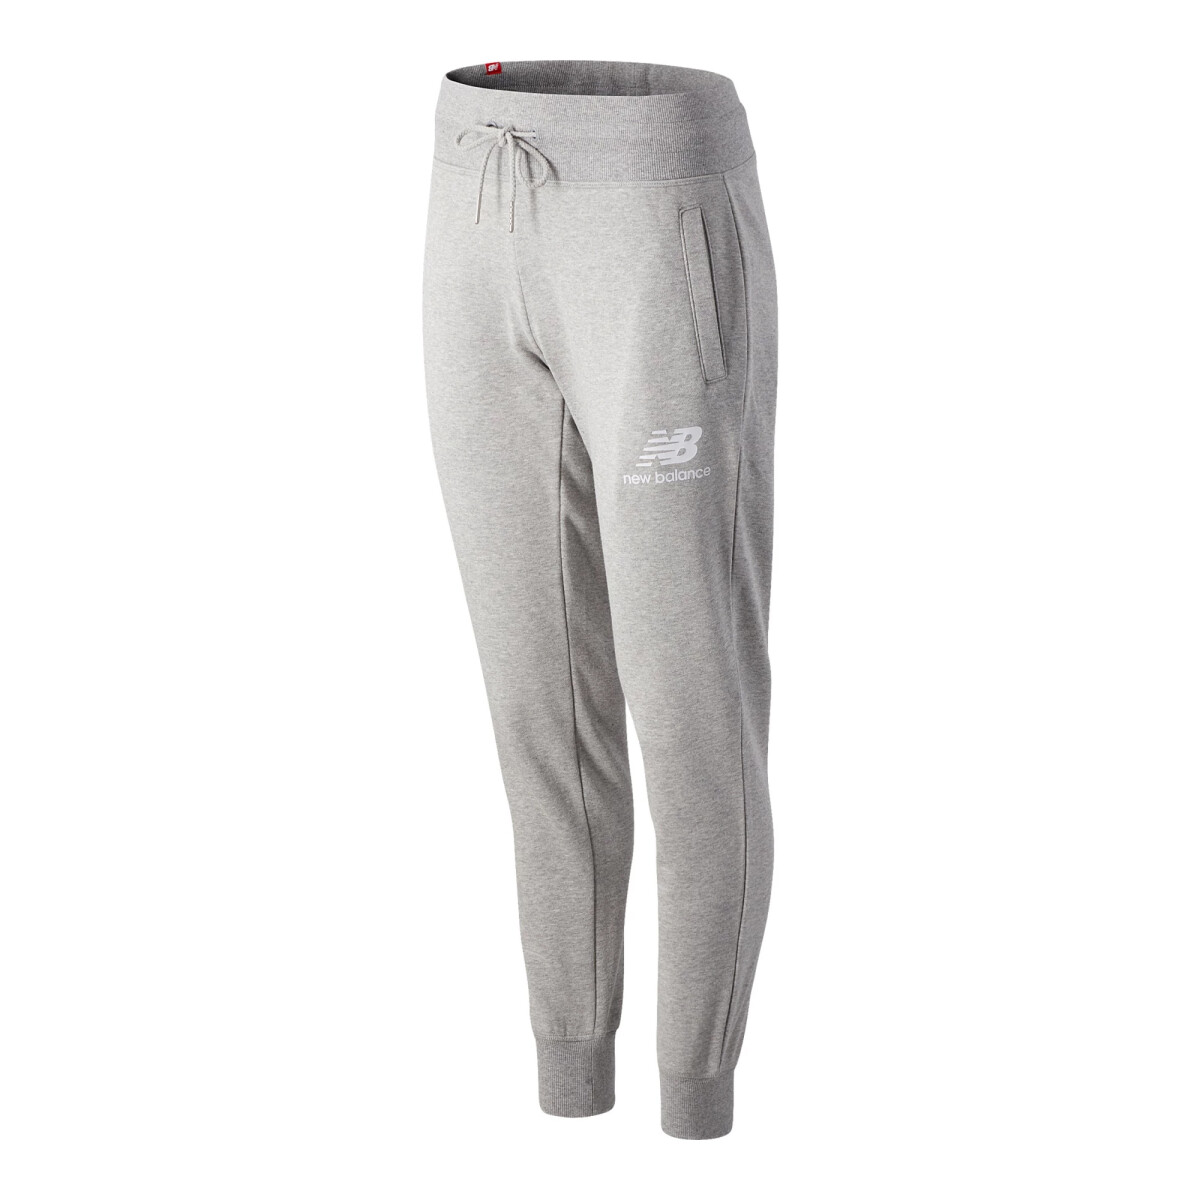 Essentials French Terry Sweatpant - NEW BALANCE 